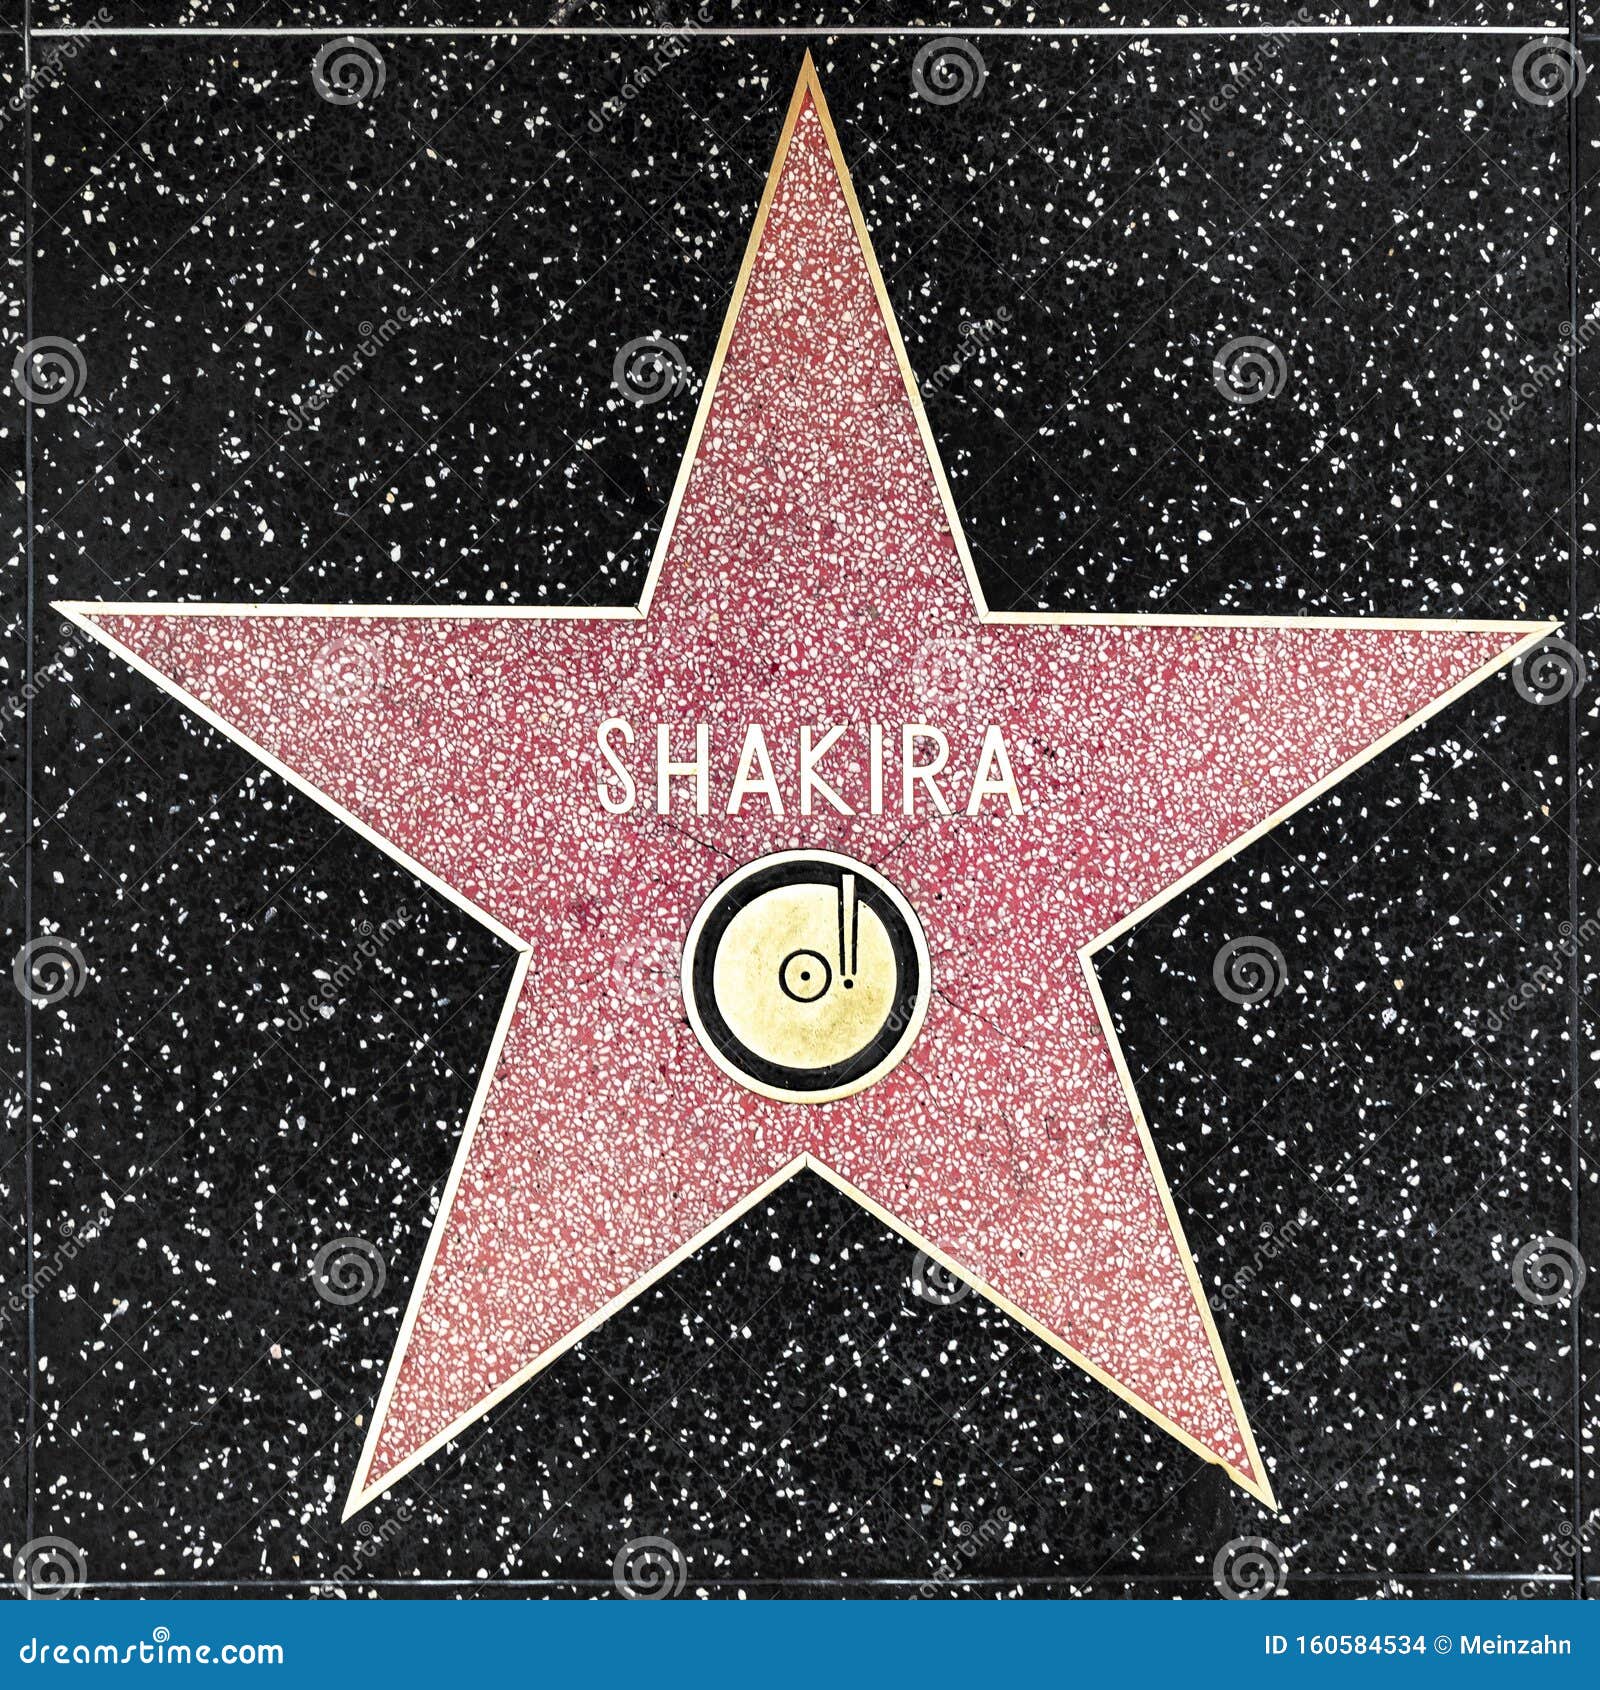 Collection 105+ Images shakira star on hollywood walk of fame Latest